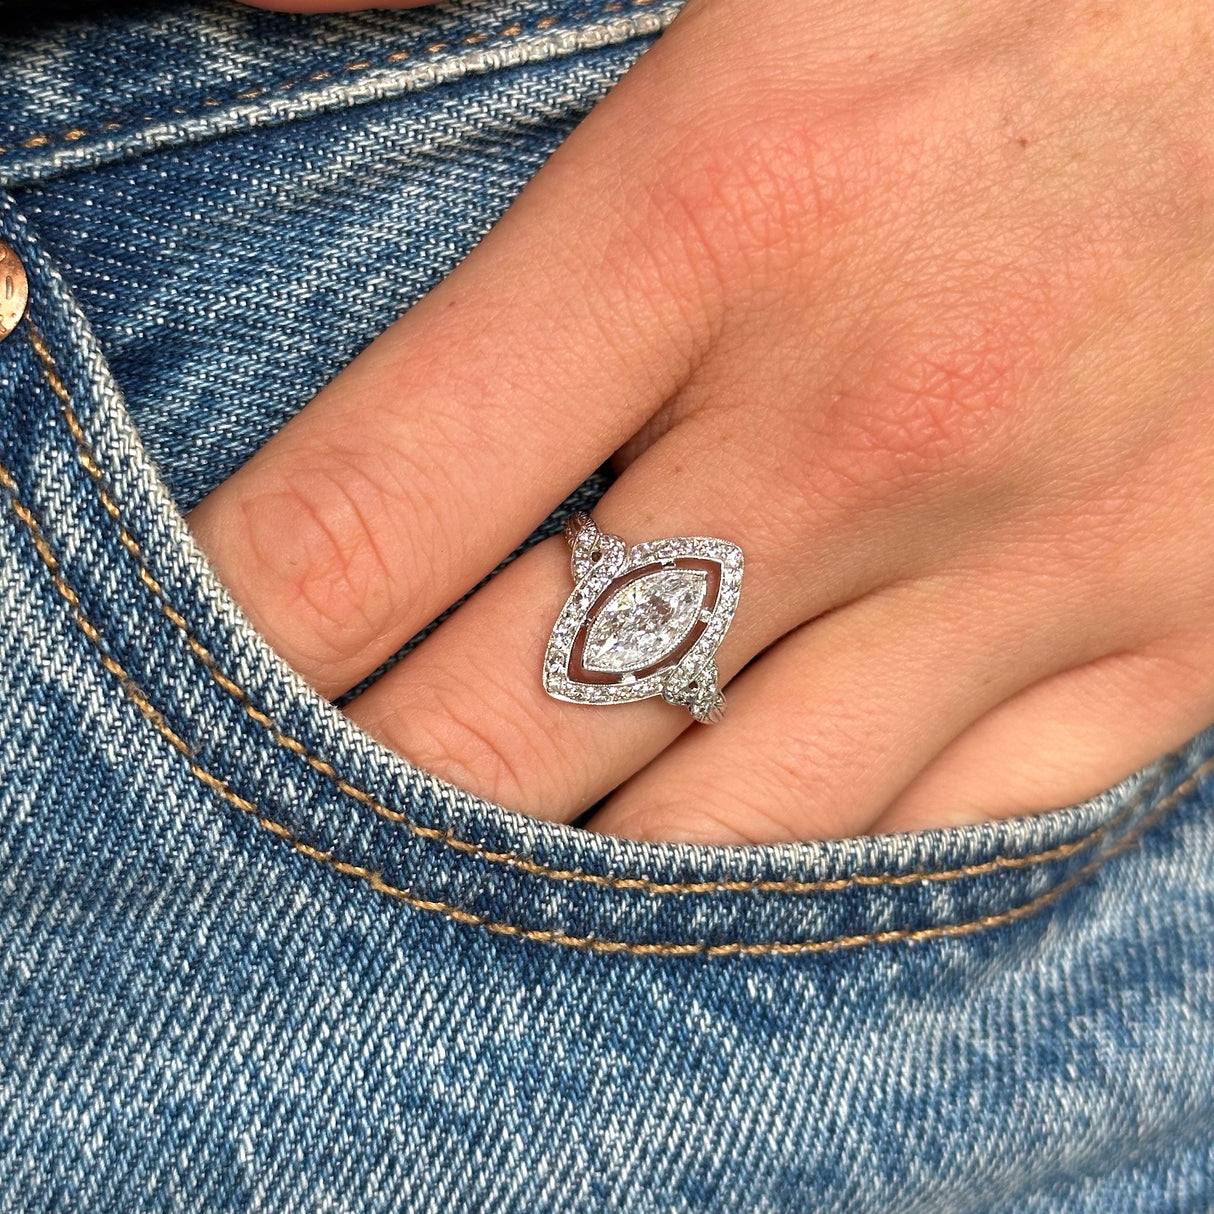 Vintage tiffany & co diamond ring, worn on hand in pocket of jeans. 